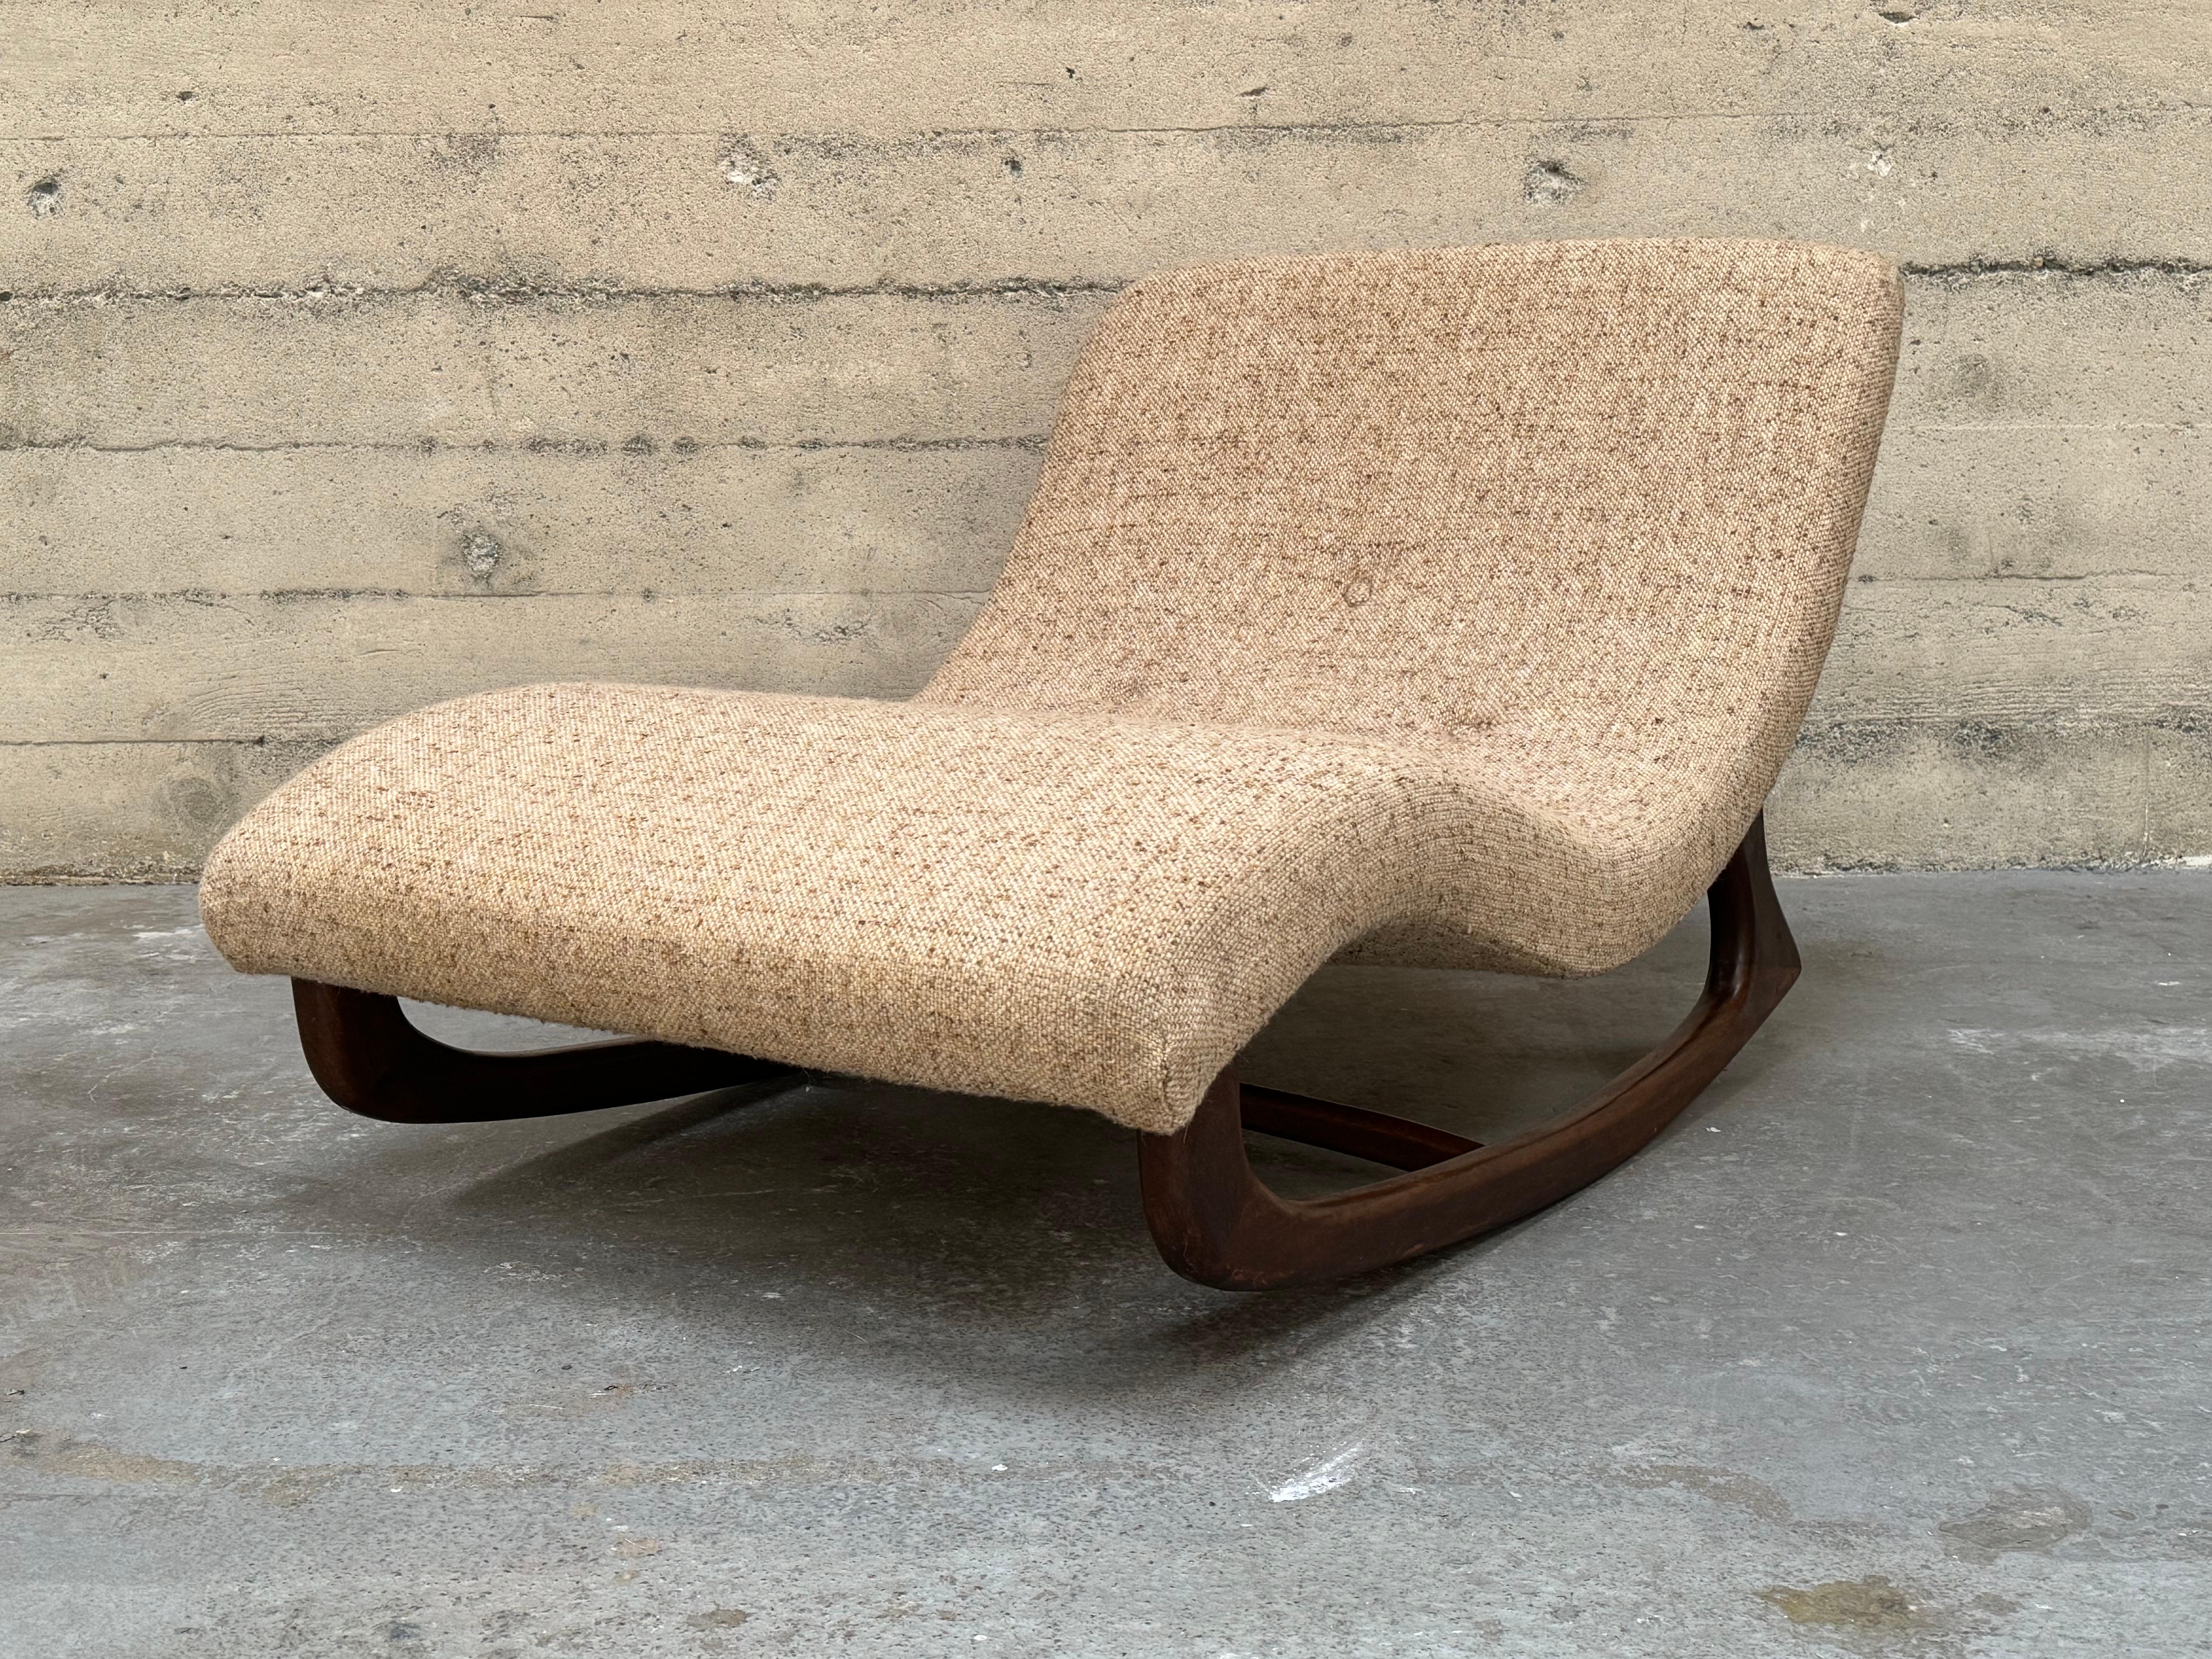 American Circa 1960s Adrian Pearsall Rocking Wave Chaise Lounge #2 